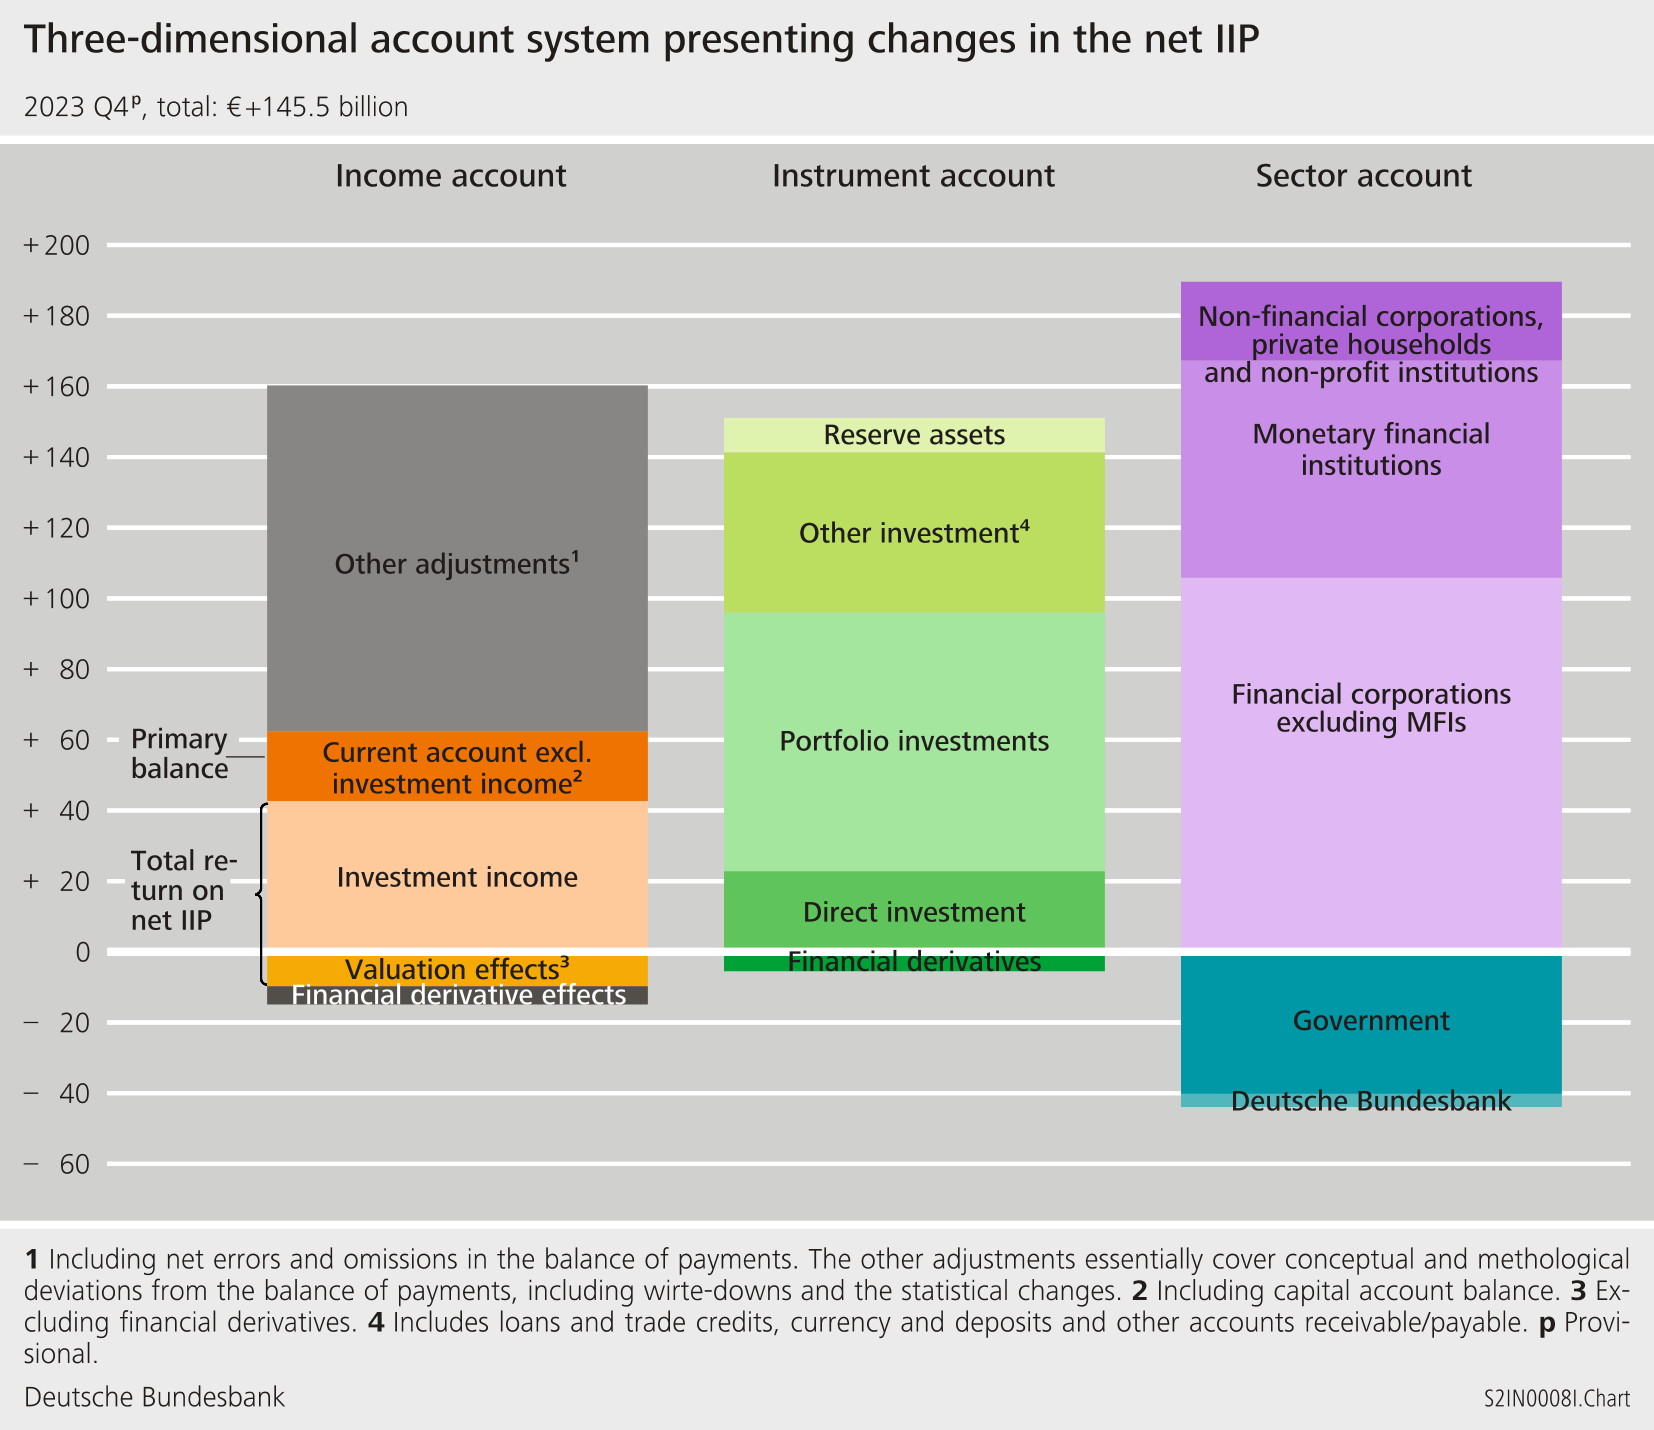 Three-dimensional account system presenting changes in the net IIP